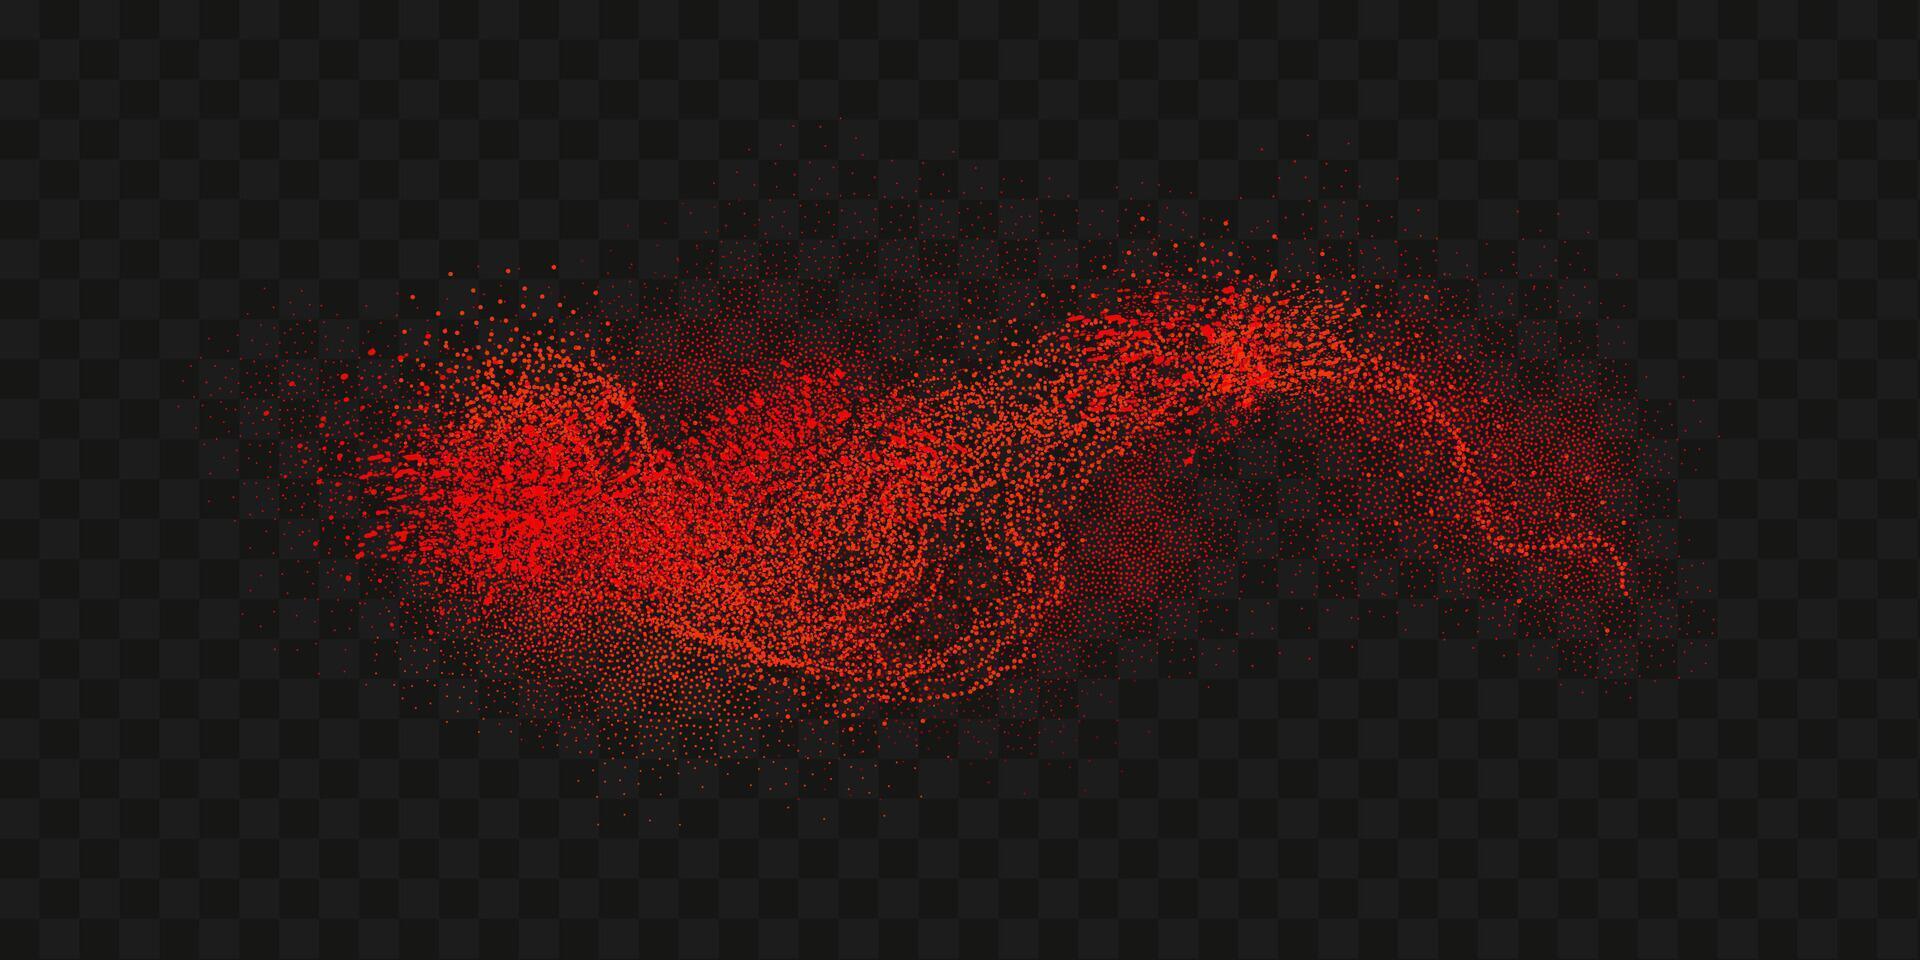 Grainy scatterings of  spicy burst . Splashes of  red pepper powder.Overlay effect chilli or paprika spice splatters. Vector realistic illustration of hot dried spice.